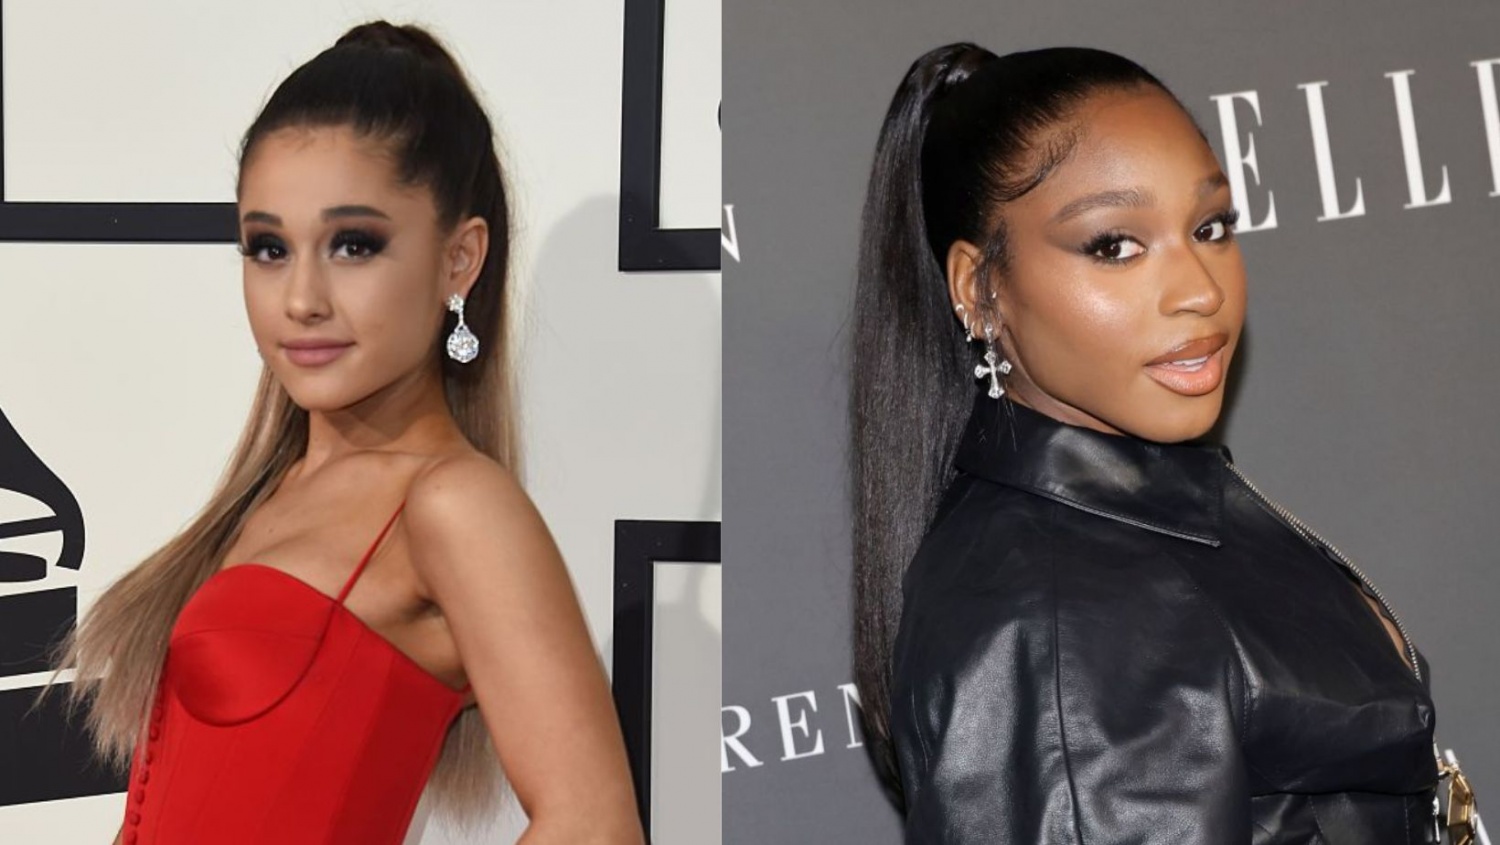 Why Netizens Worry Ariana Grande Might End Up Like Normani After Switching to New Management